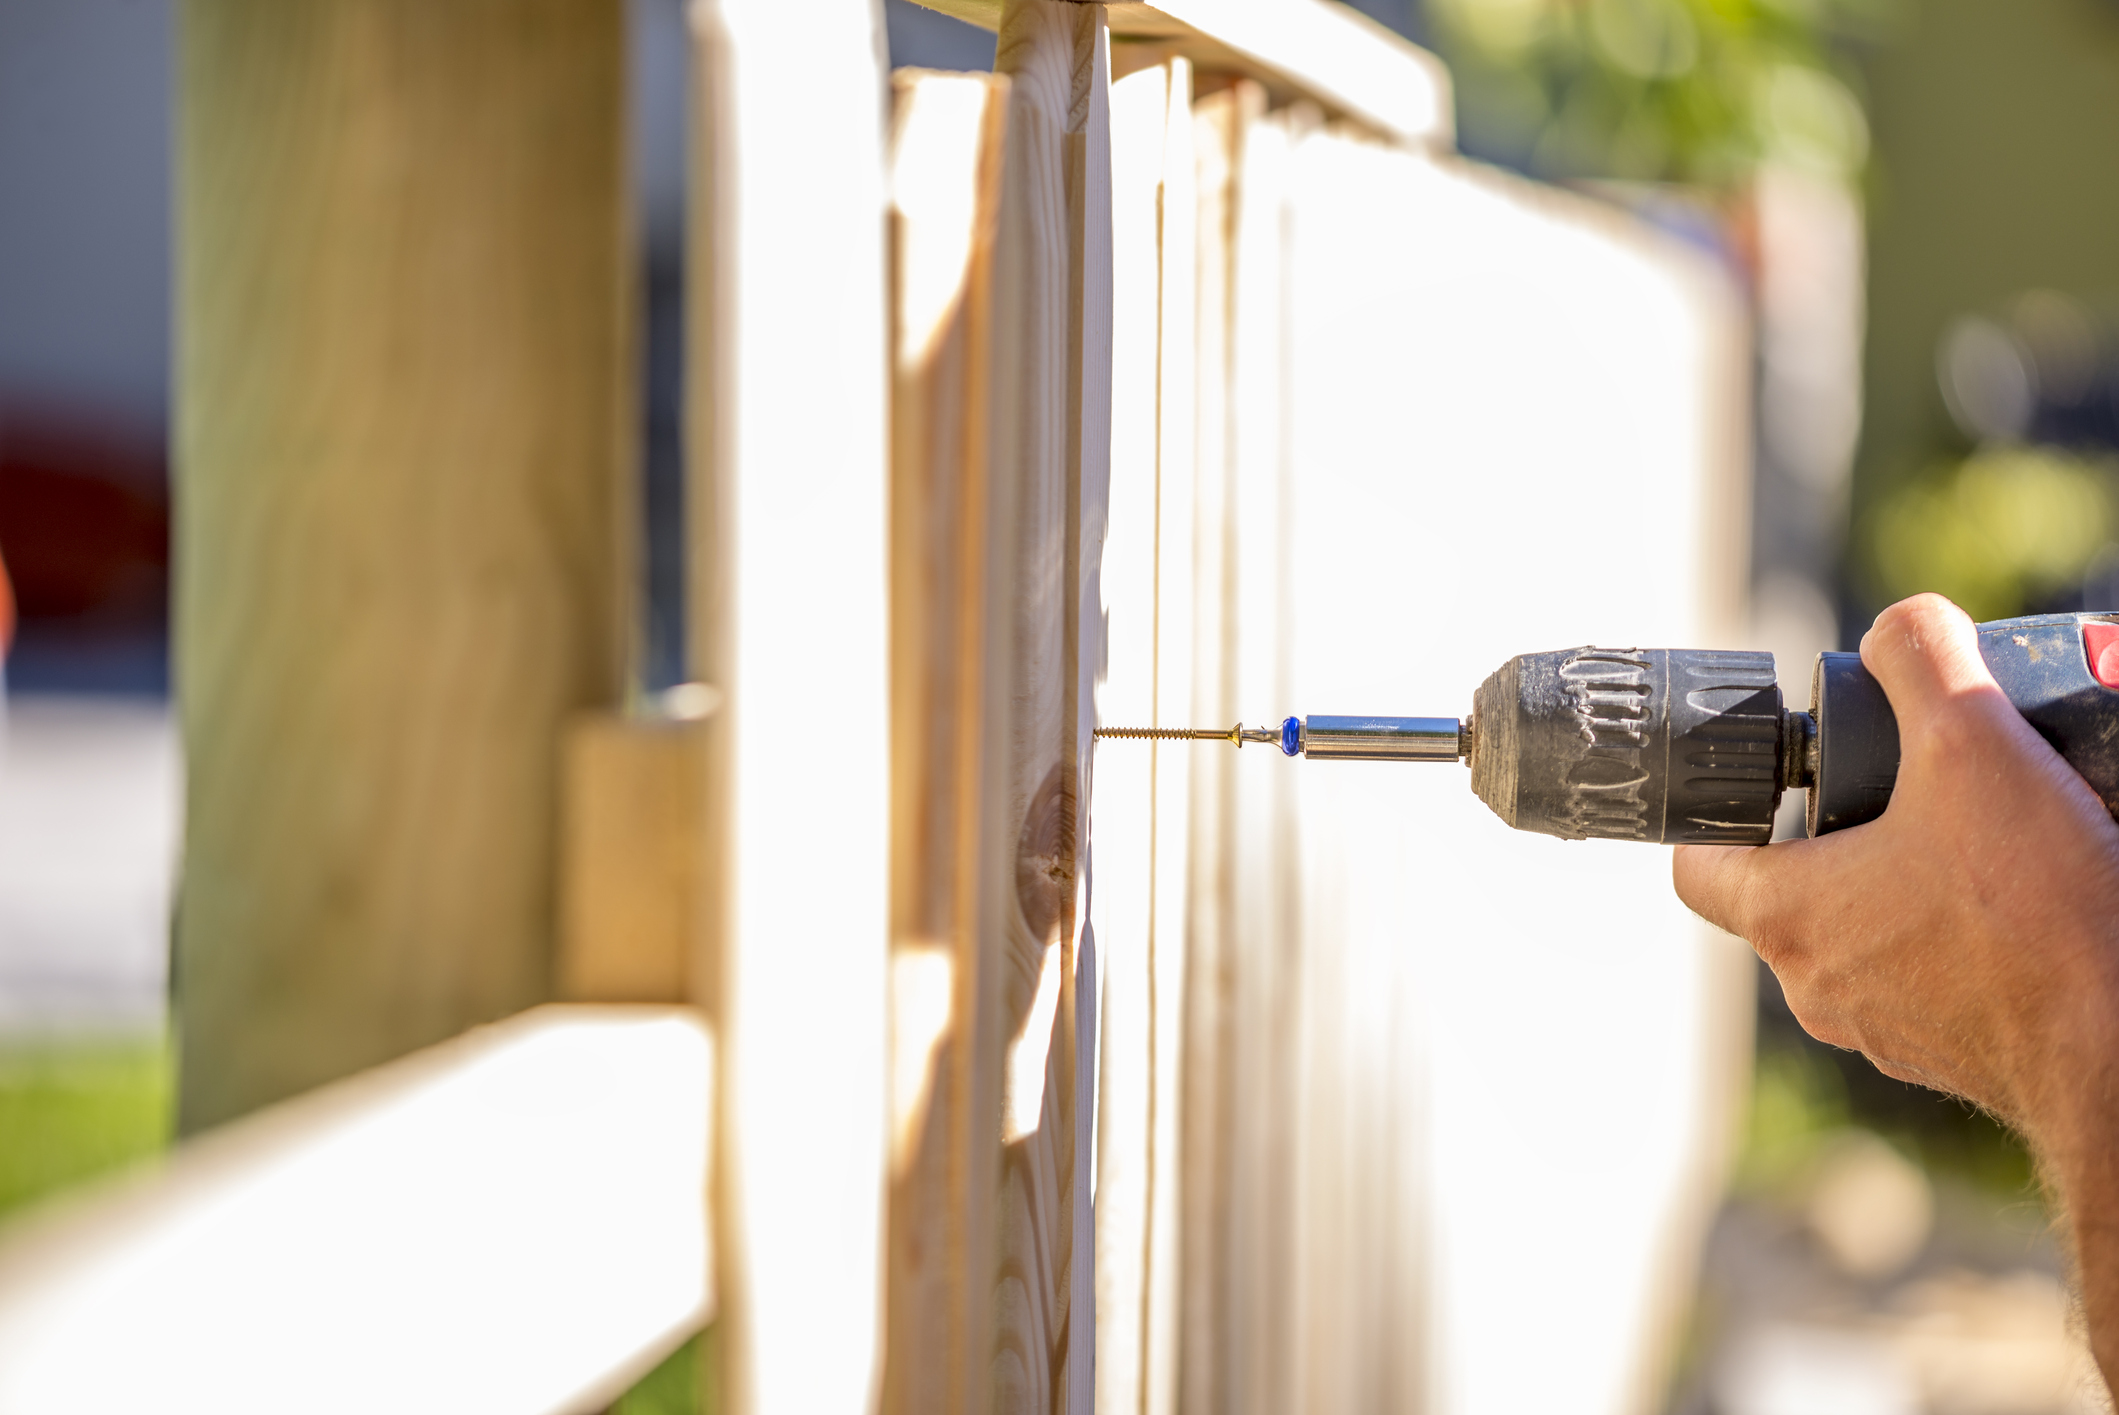 Person holding a drill, drilling into a wooden fence